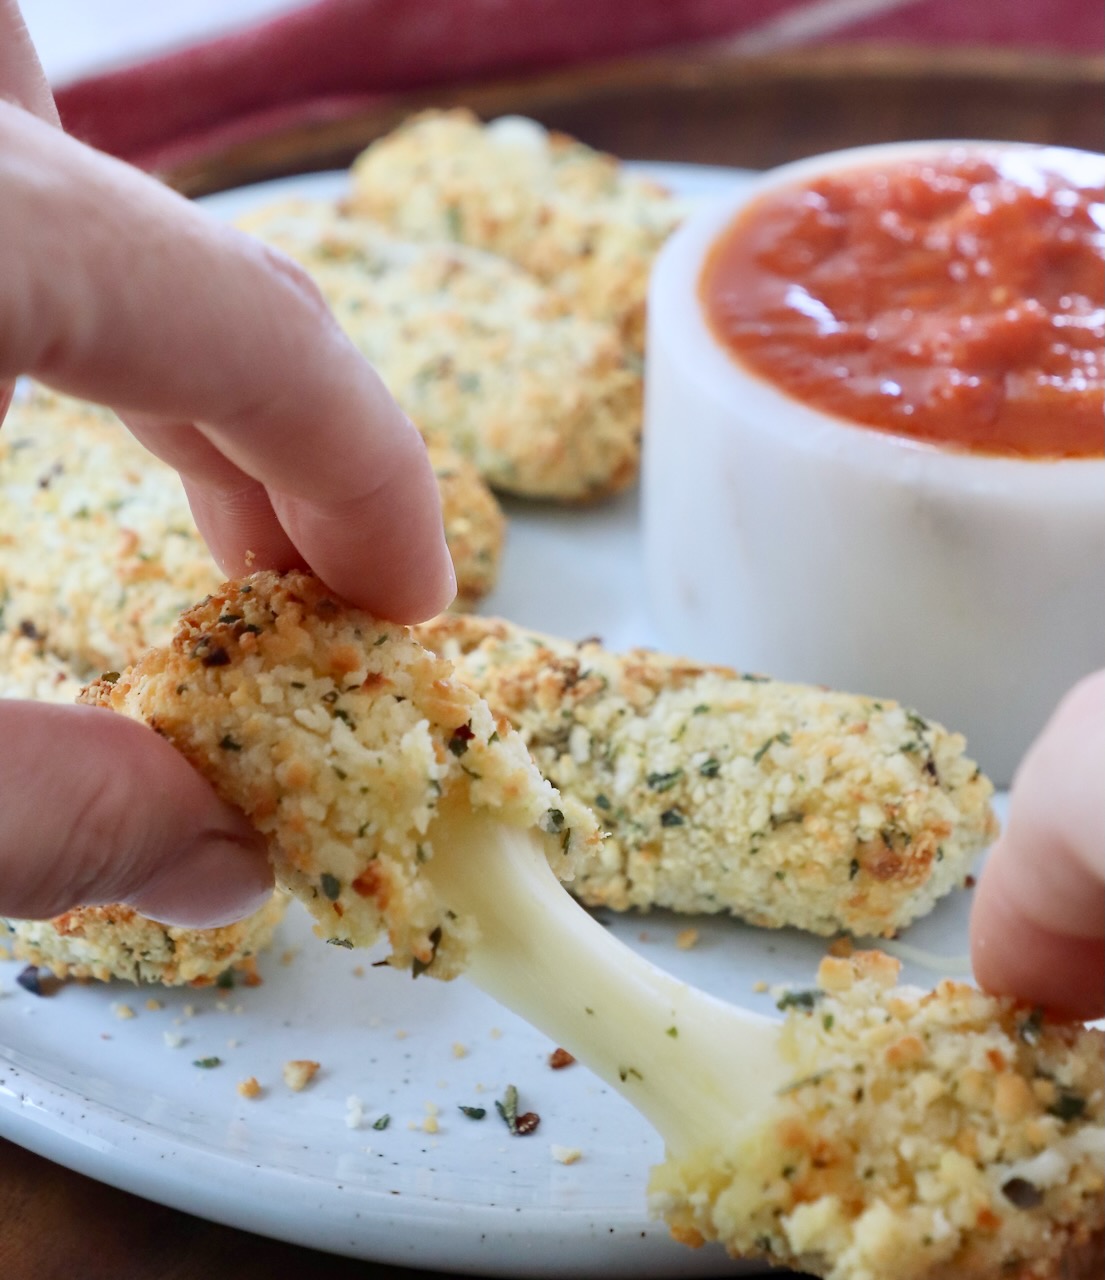 mozzarella stick being pulled in half by hands